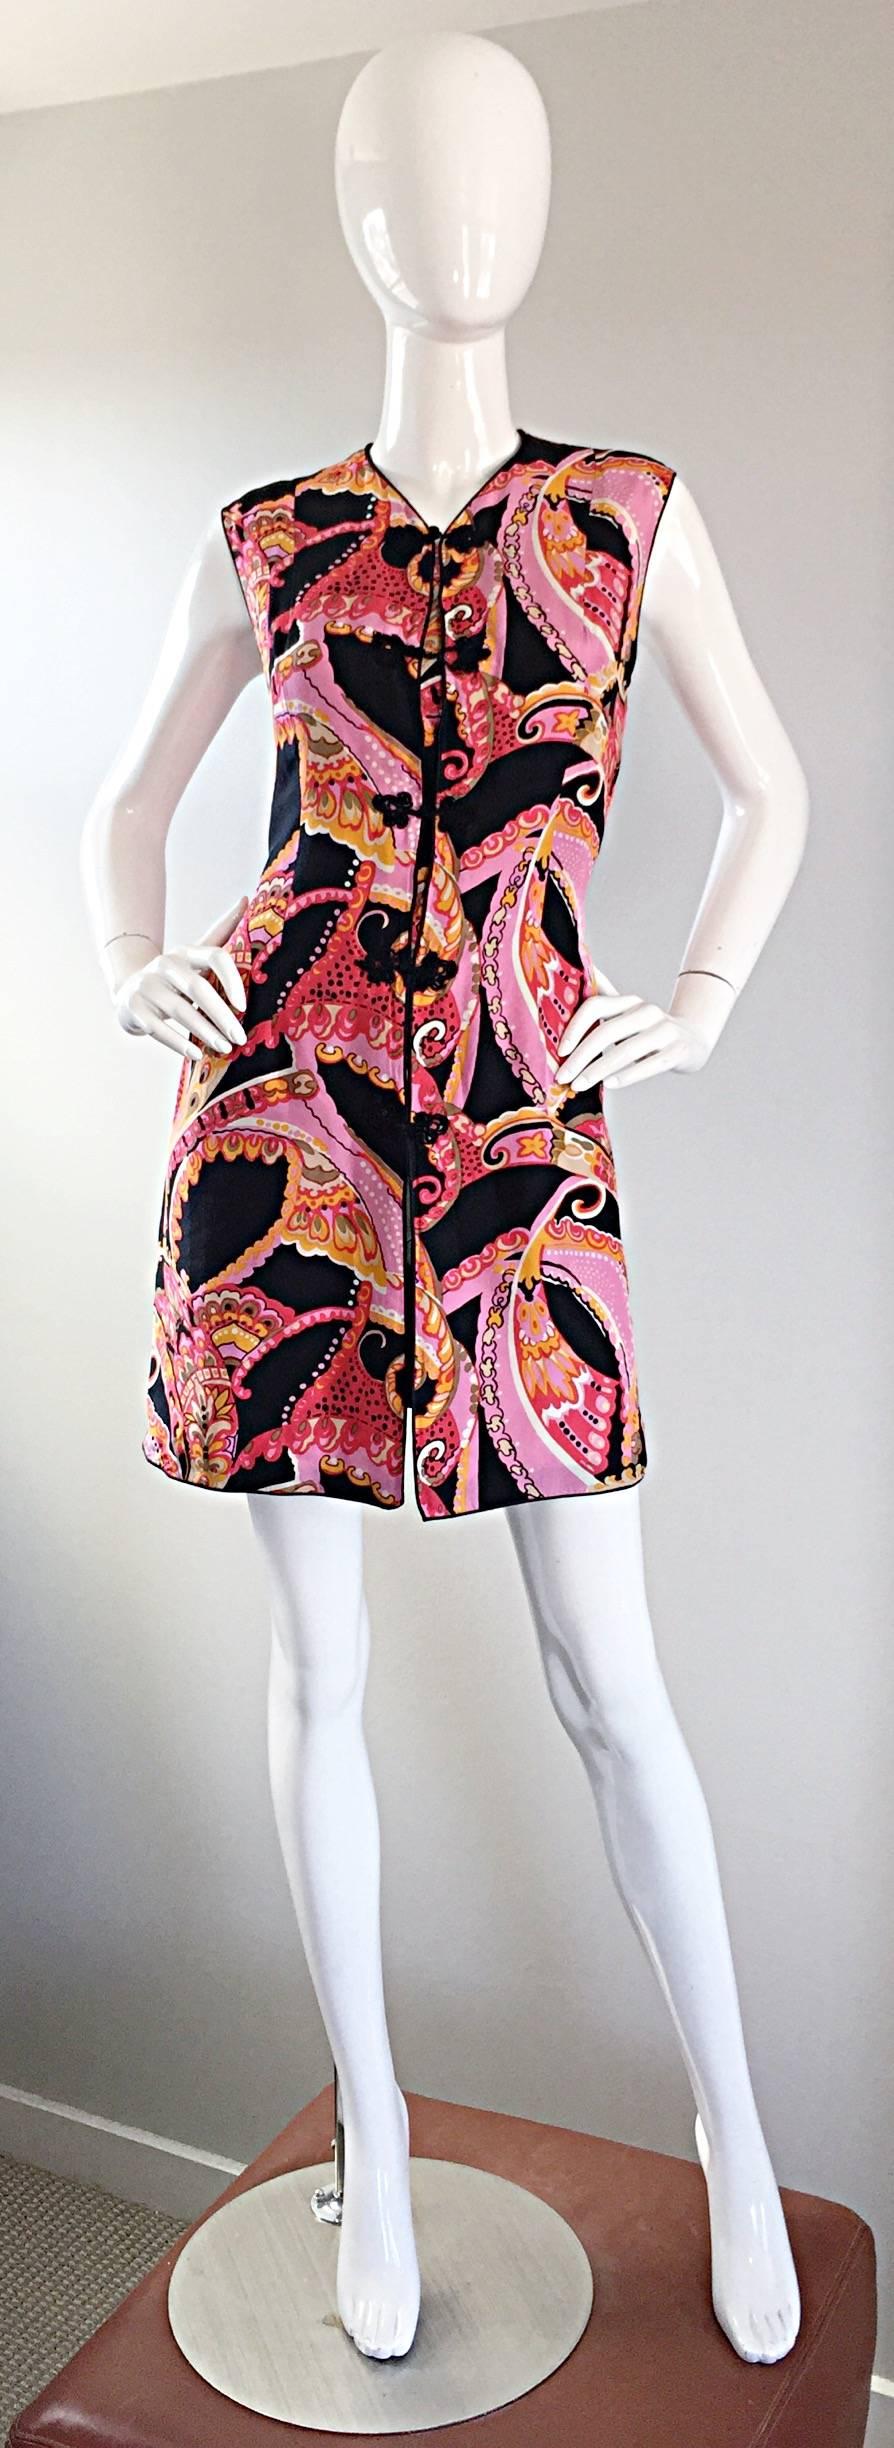 Awesome vintage 60s retro silk 'Asian' themed long silk vest or mini dress! Features a psychedelic print of pink, fuchsia, black, orange, red, brown and black throughout. Intricate silk Asian buttons down the bodice. Fully lined. Vents at both sides